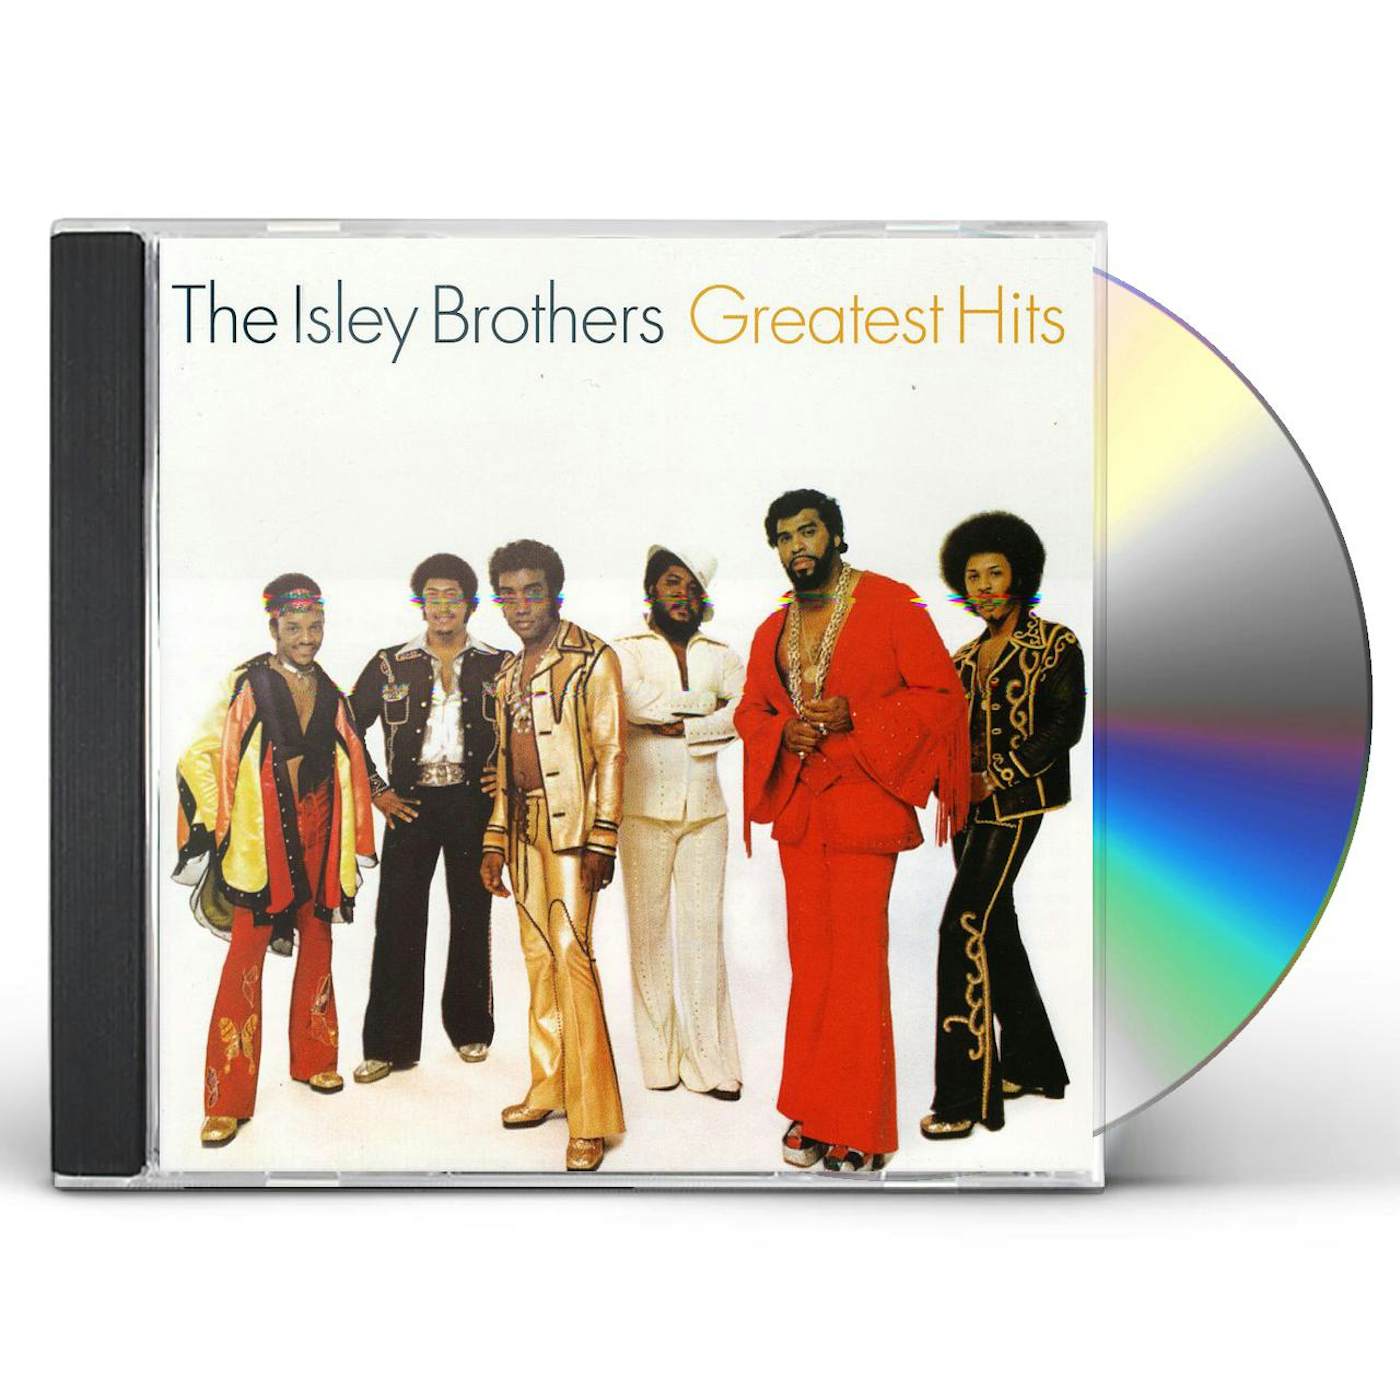 Greatest Hits & More by The Delfonics (CD, Masters) for sale online